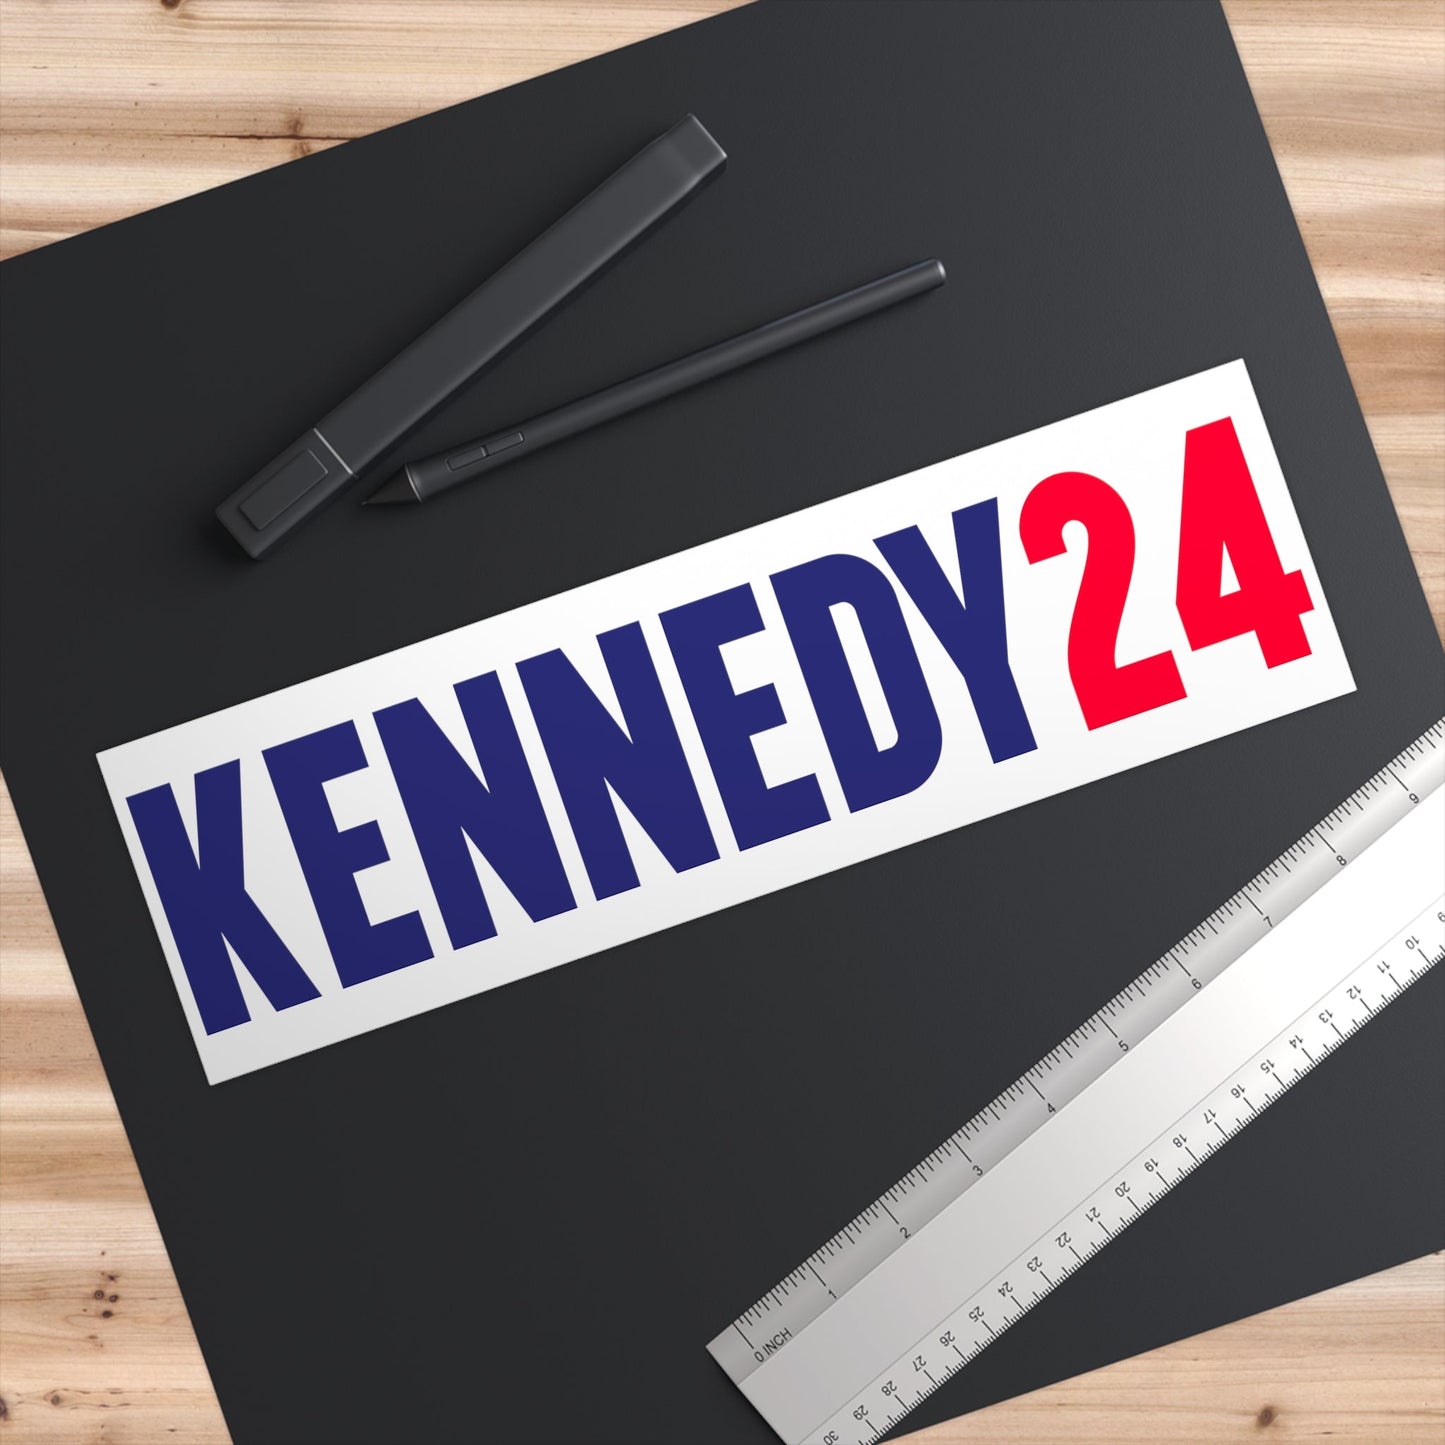 Kennedy24 Bumper Sticker - TEAM KENNEDY. All rights reserved